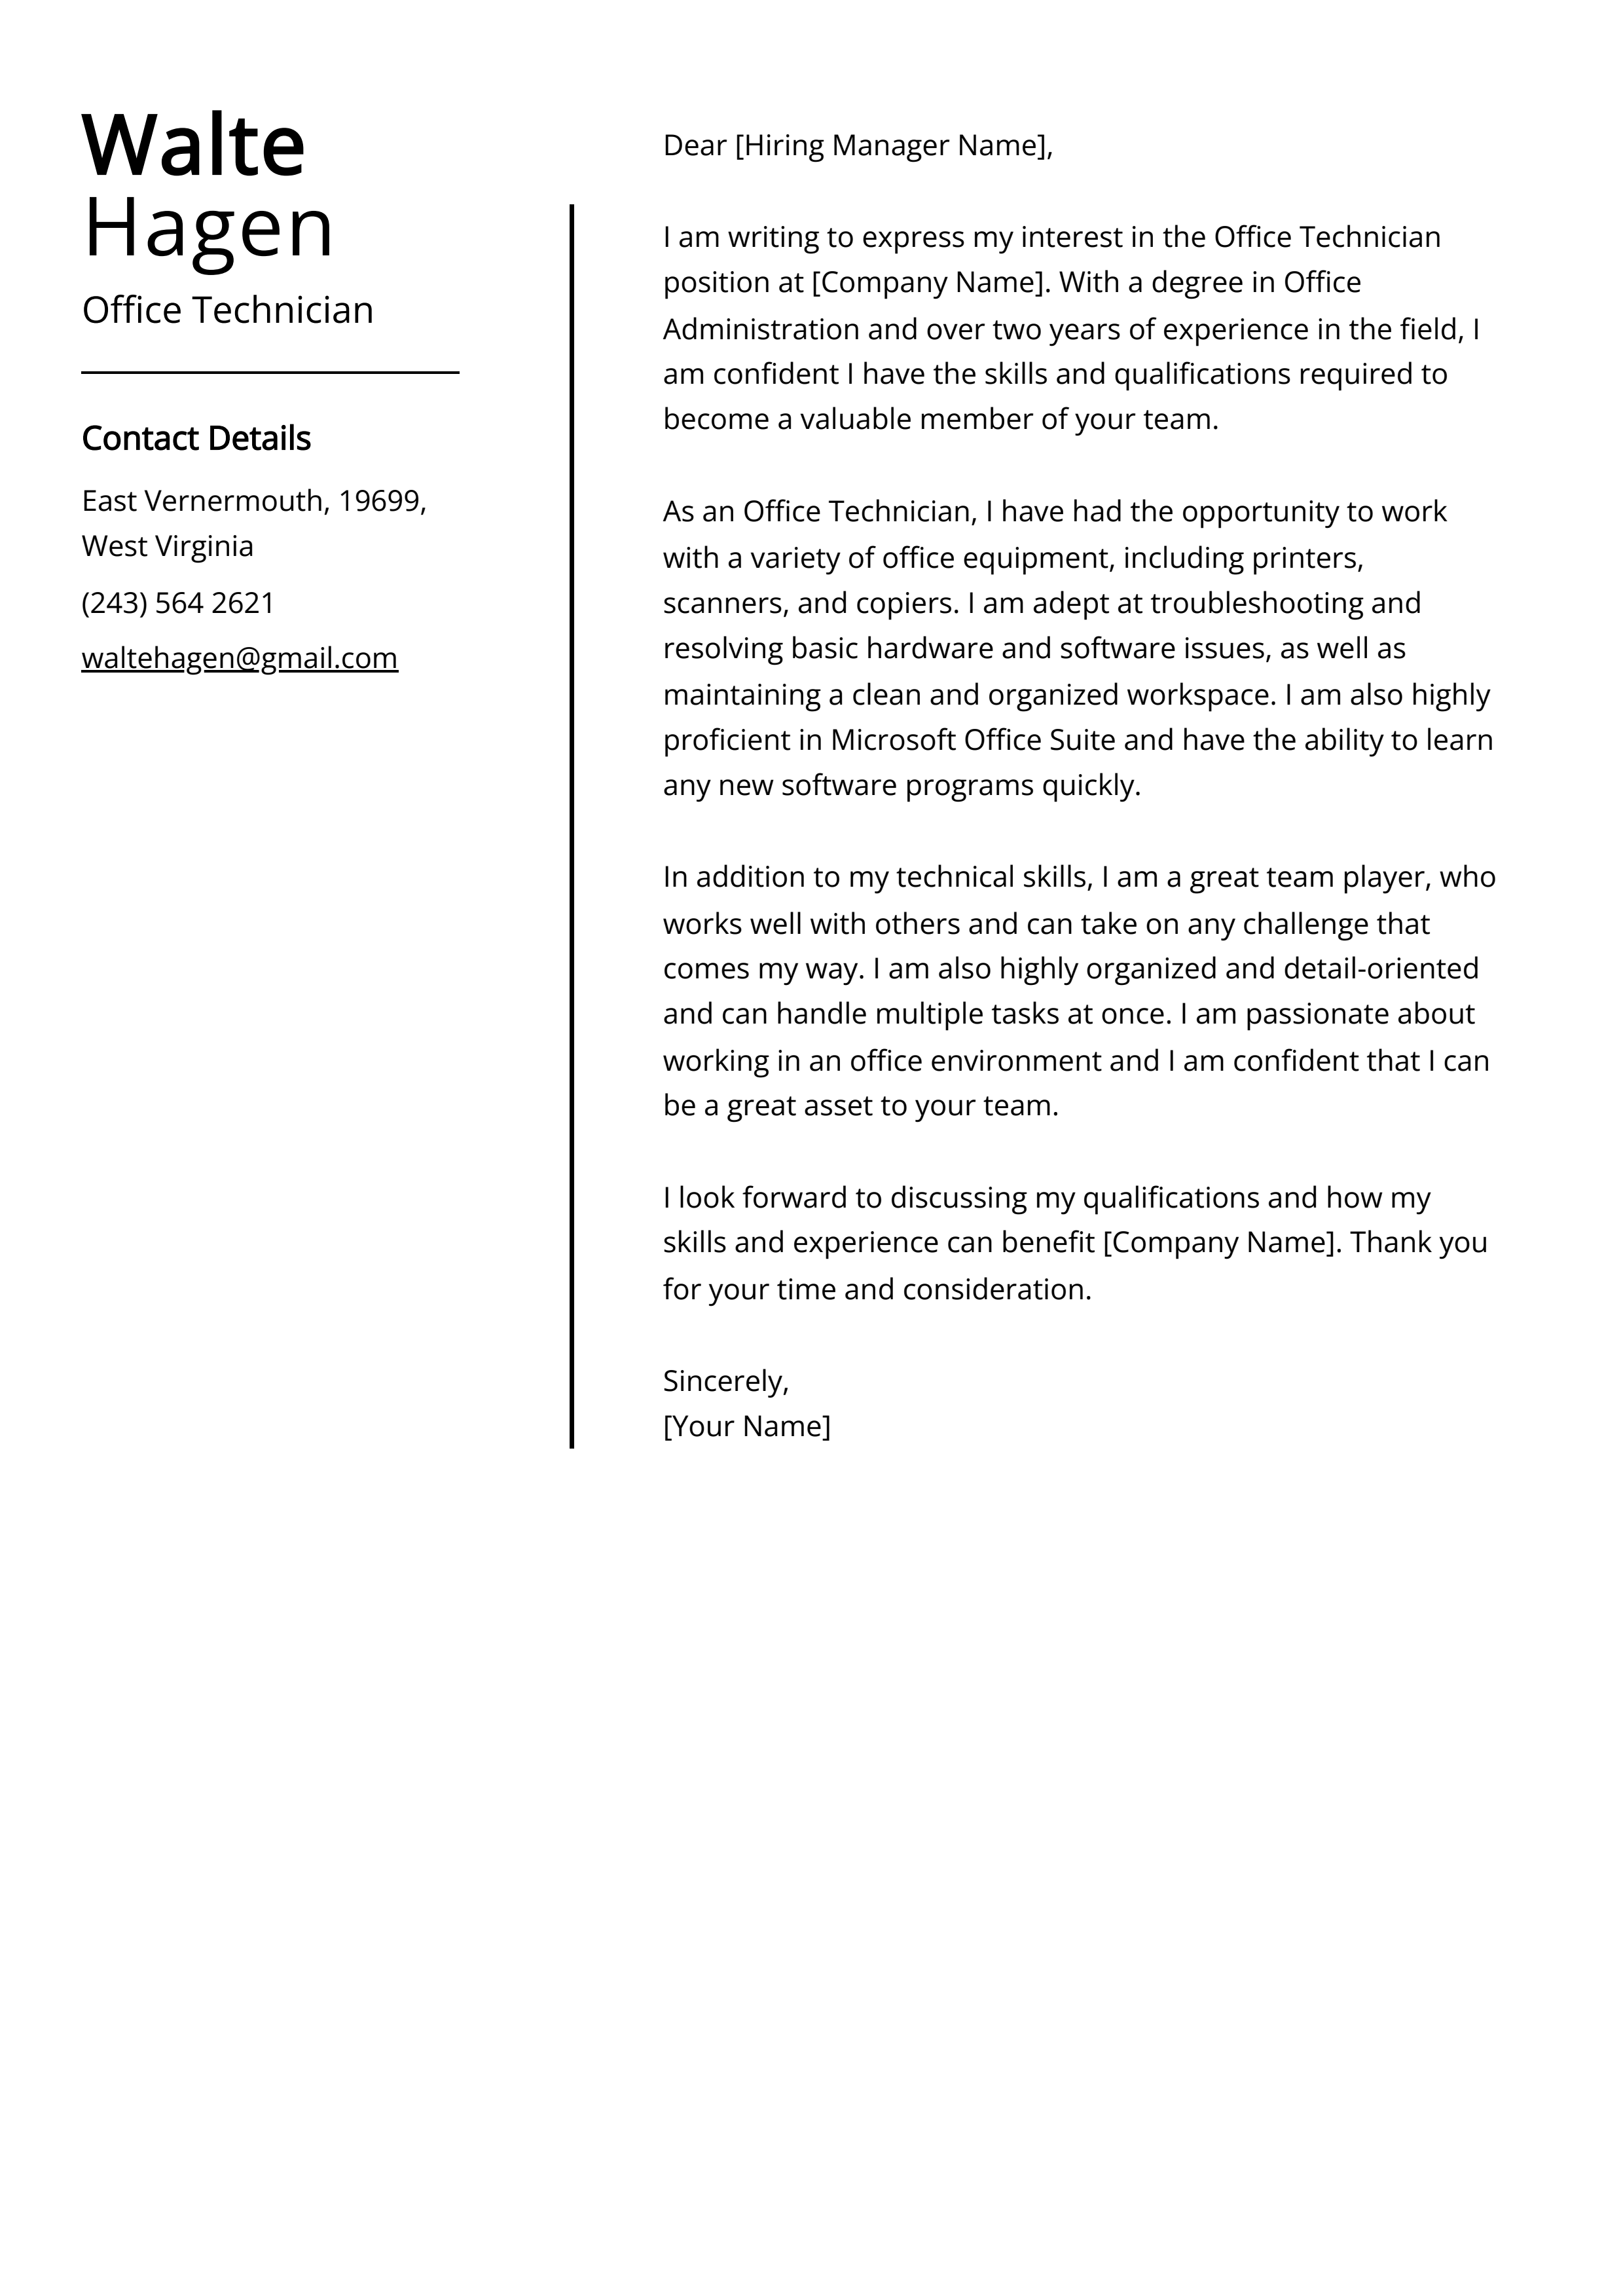 Office Technician Cover Letter Example